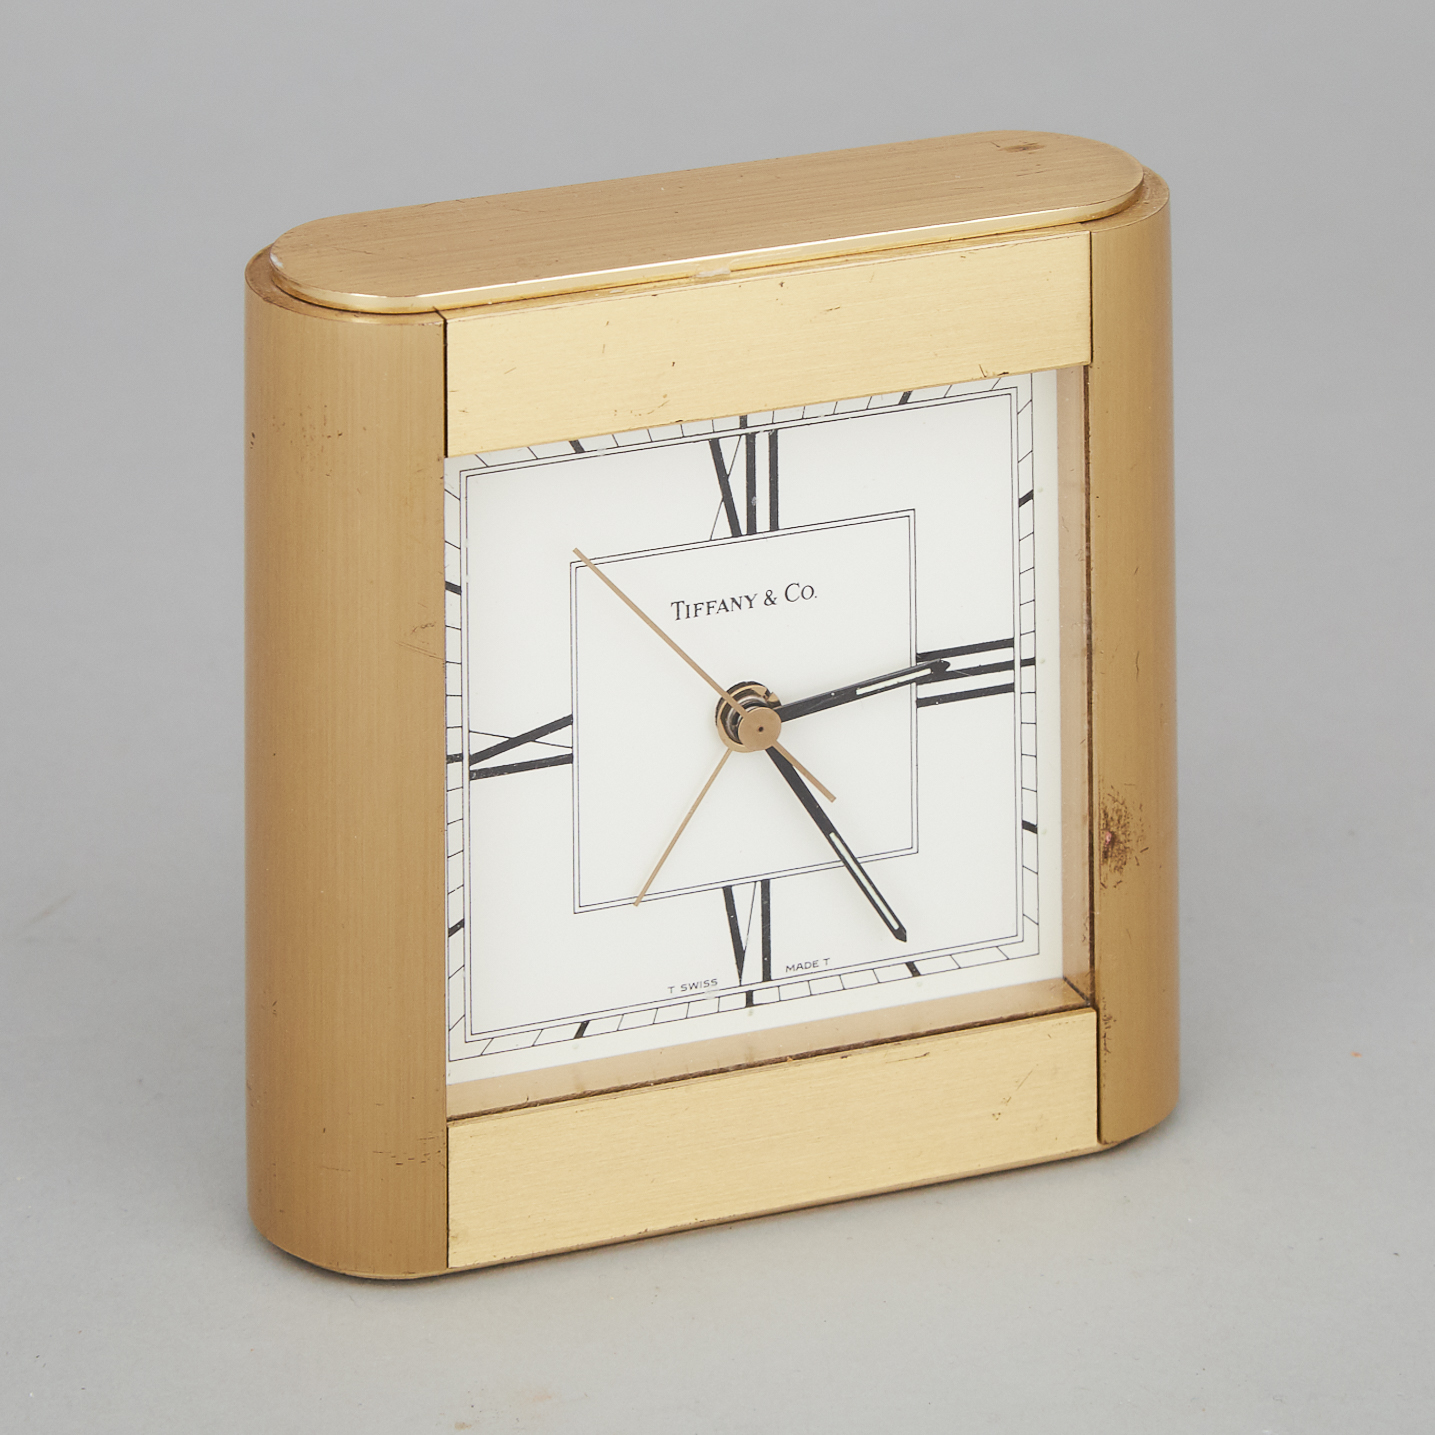 Tiffany & Co. Swiss Lacquered Brass Alarm Clock, late 20th century